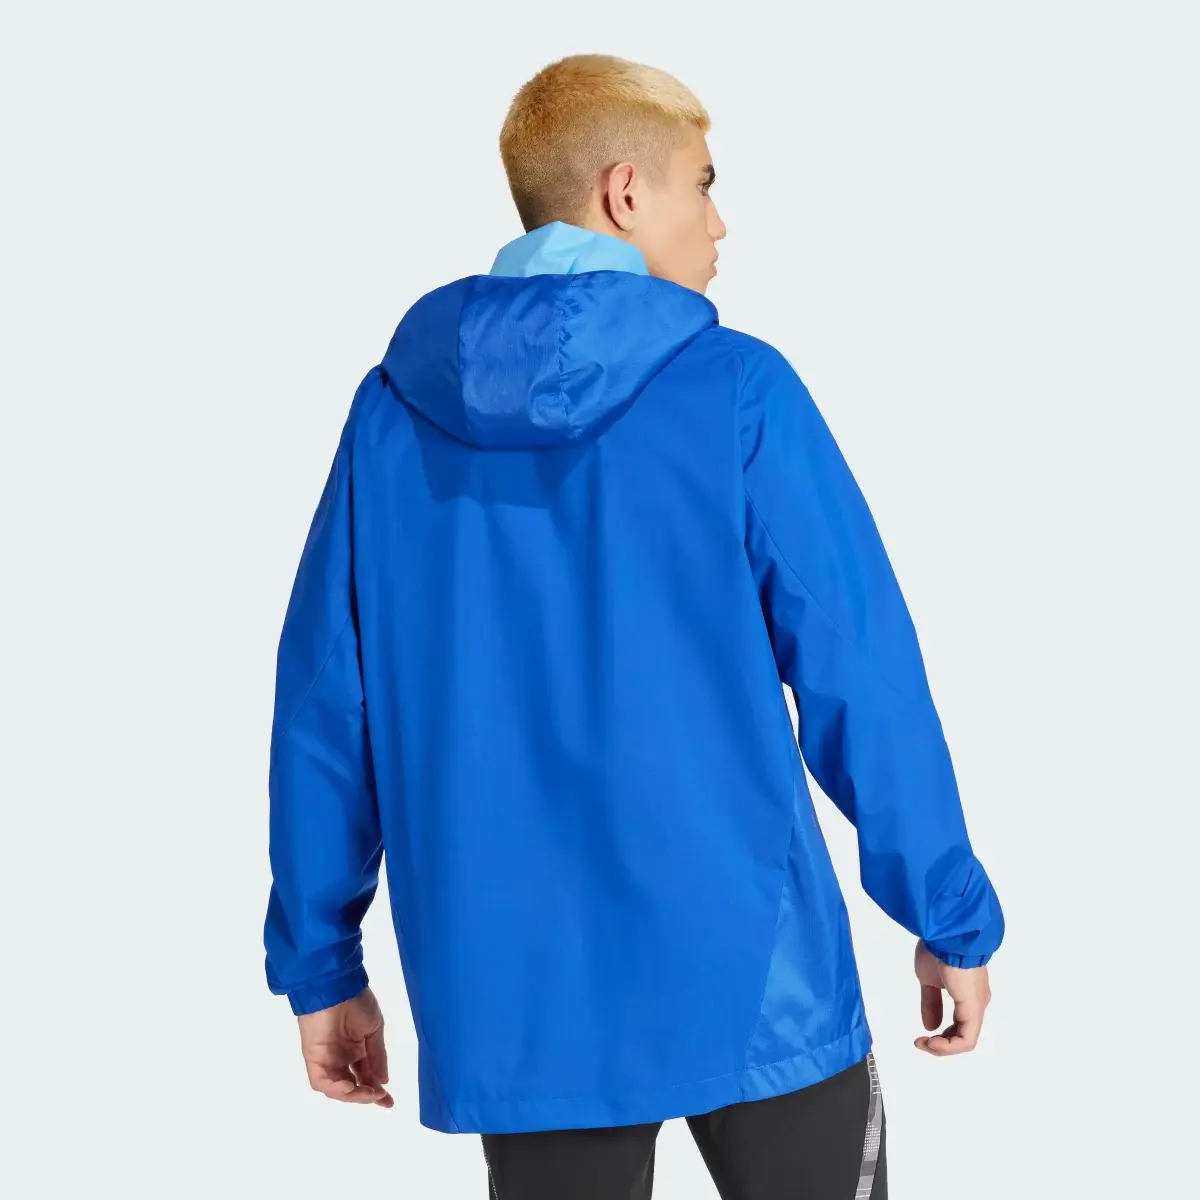 Adidas Tiro 24 Competition All-Weather Jacket. 3